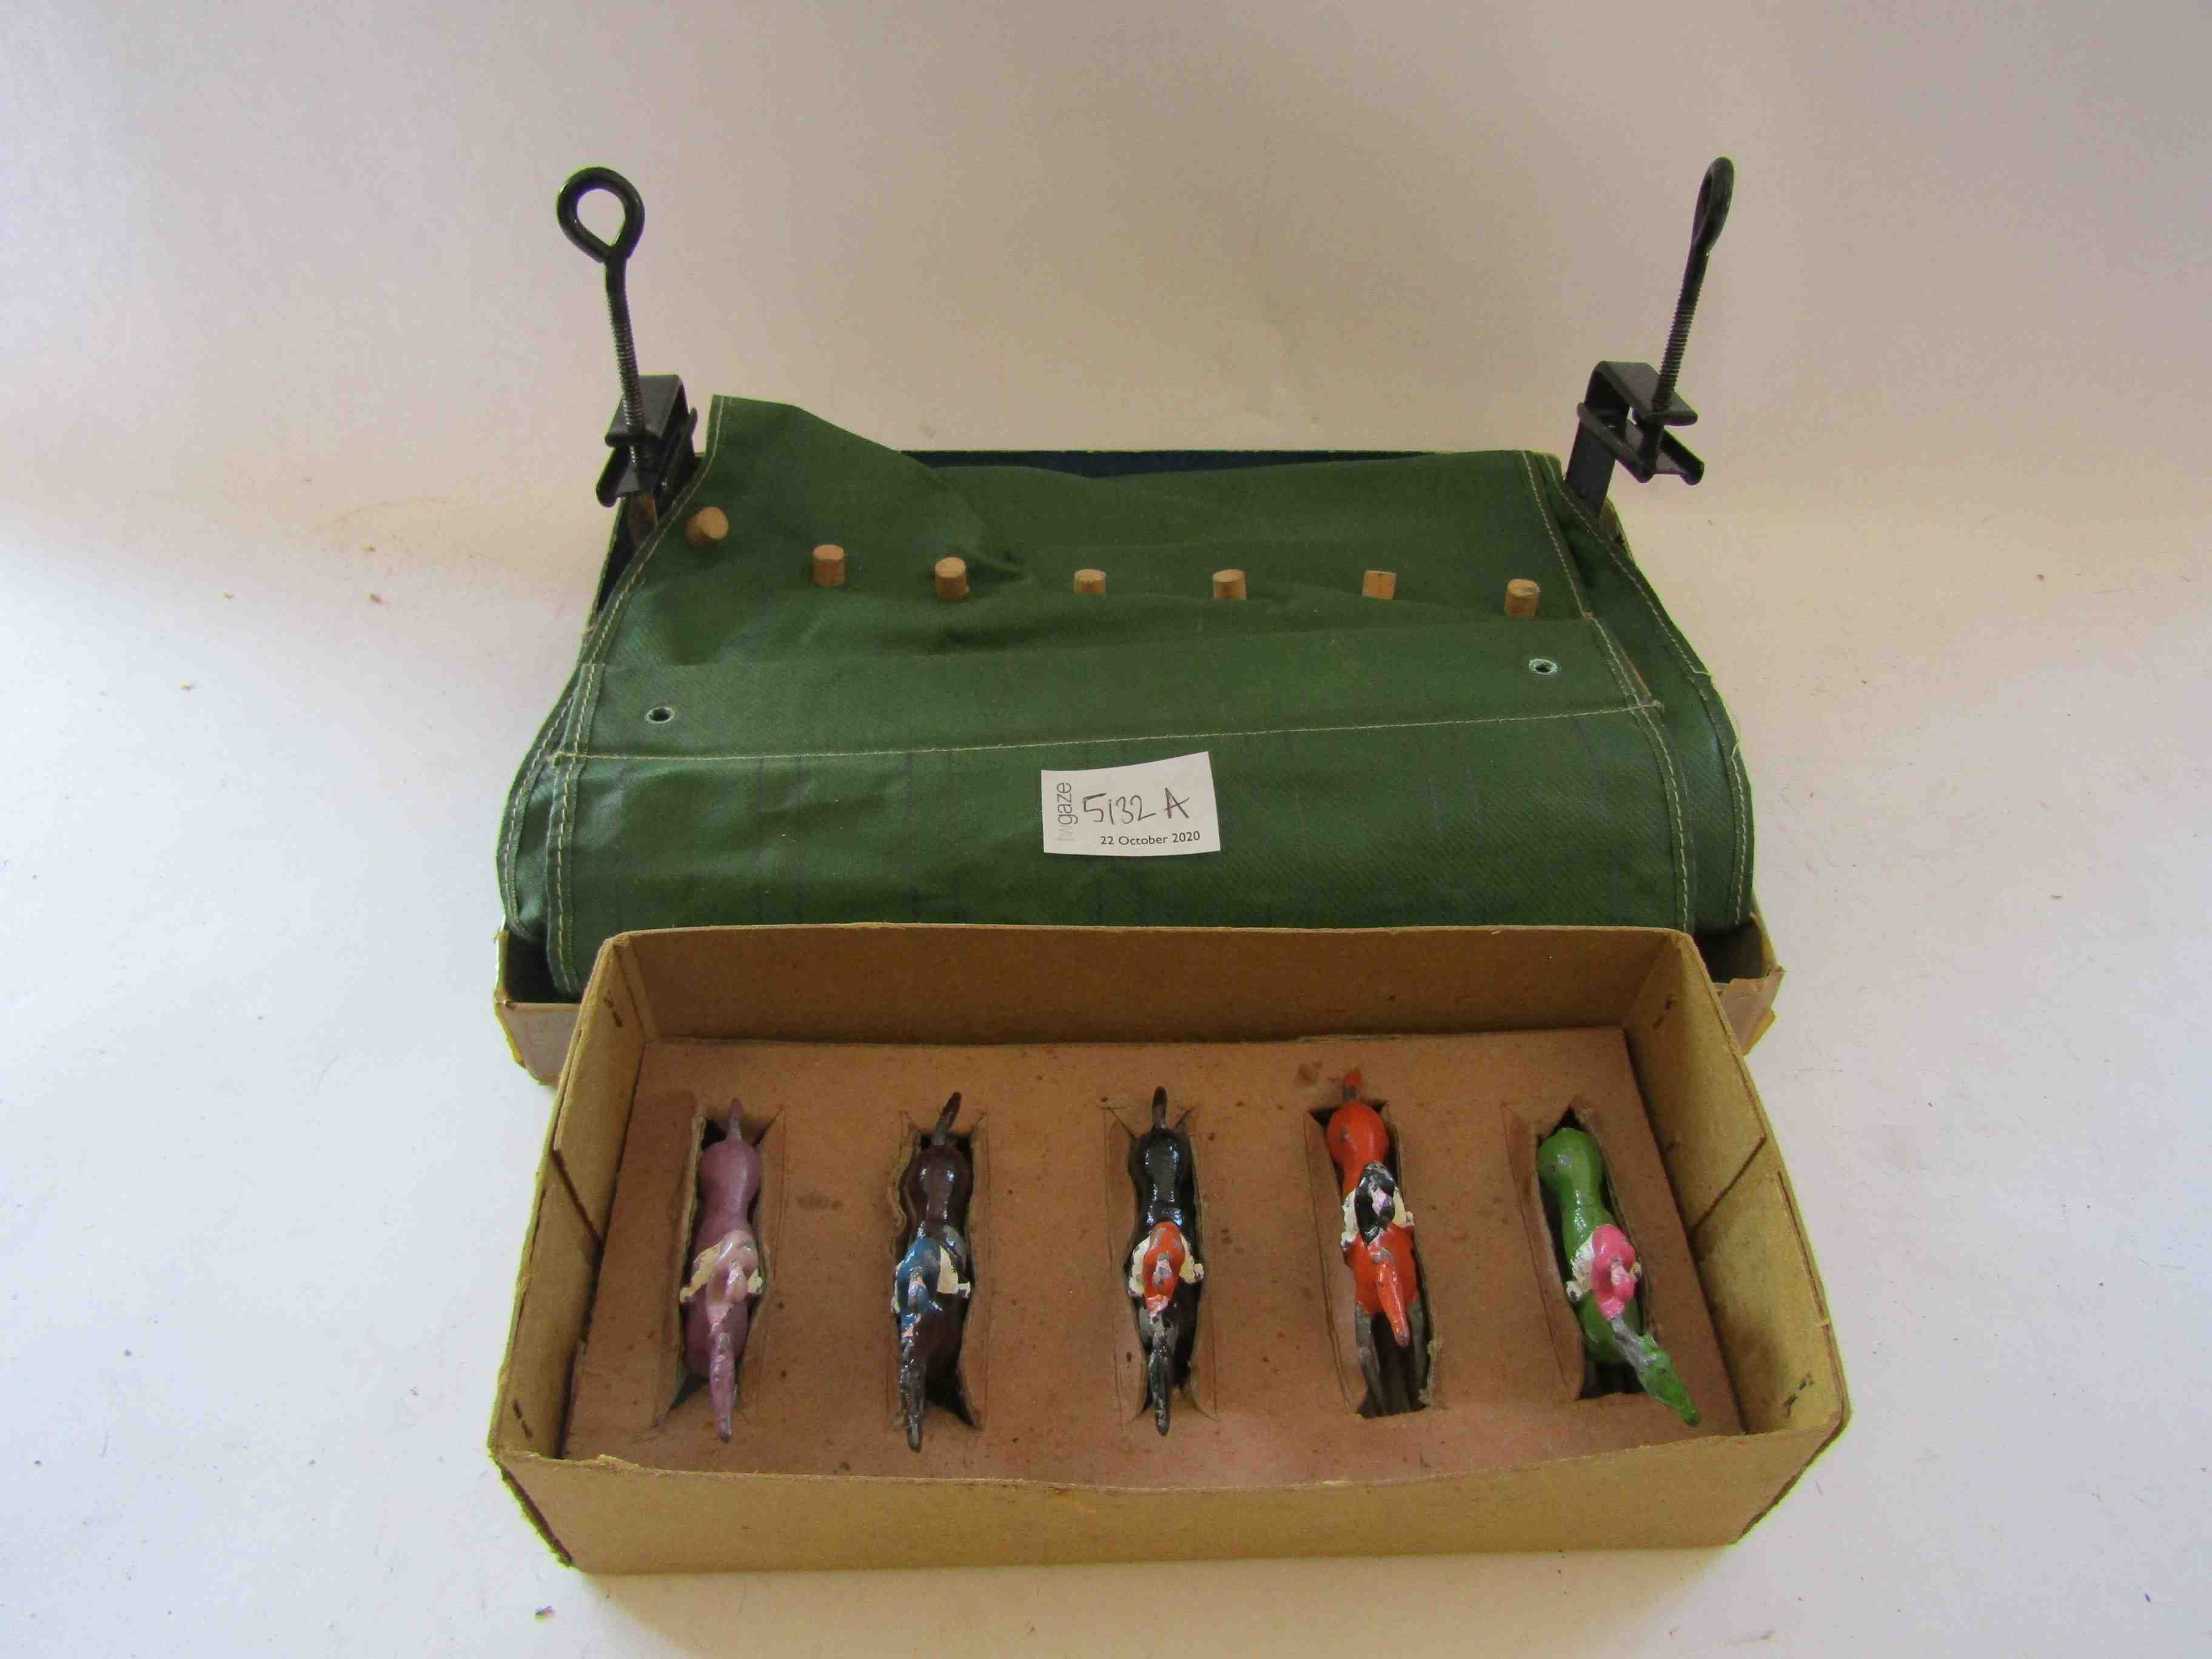 Escalado mechanical horse racing game, by Chad Valley, five intact lead horses, track,